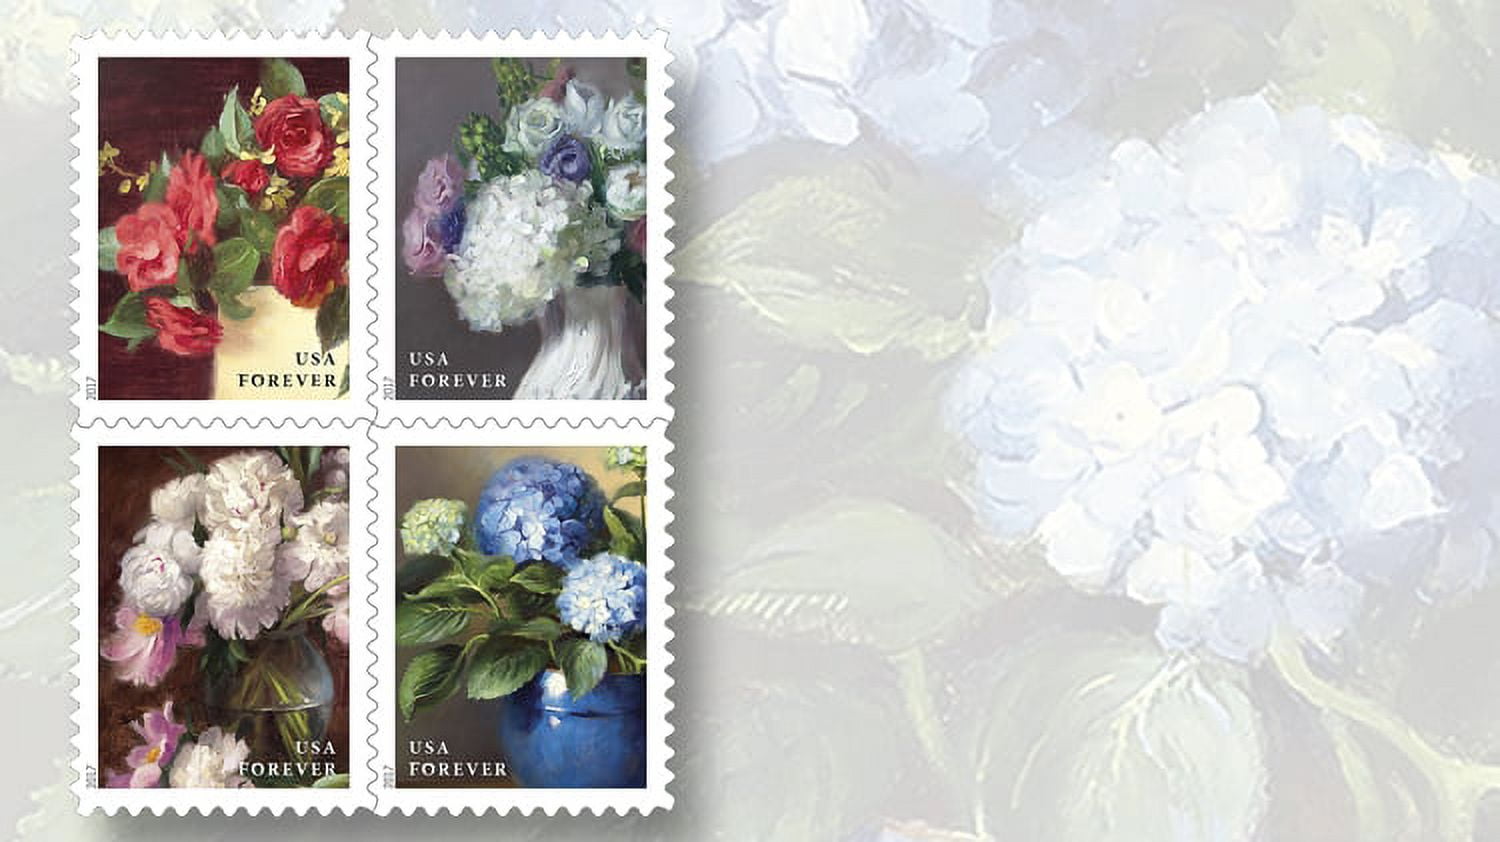 USPS Wild Orchids Flowers Forever Stamps Postal First Class US Postage  Stamps Birthday Wedding Celebration Engagement Anniversary Bridal Shower  (Strip